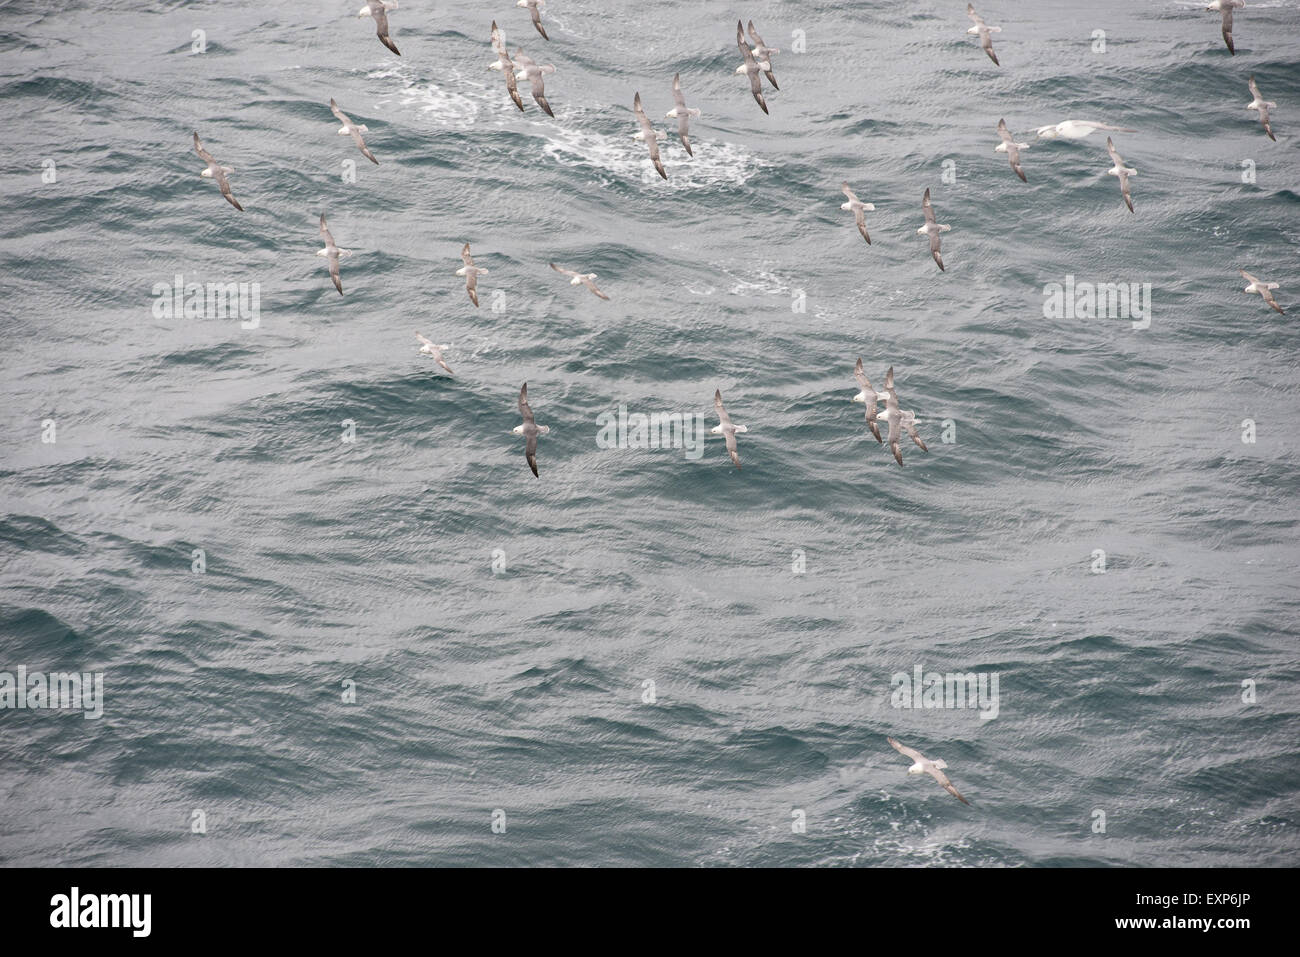 A flock of northern fulmars, Fulmarus glacialis, in flight as seen from above Stock Photo